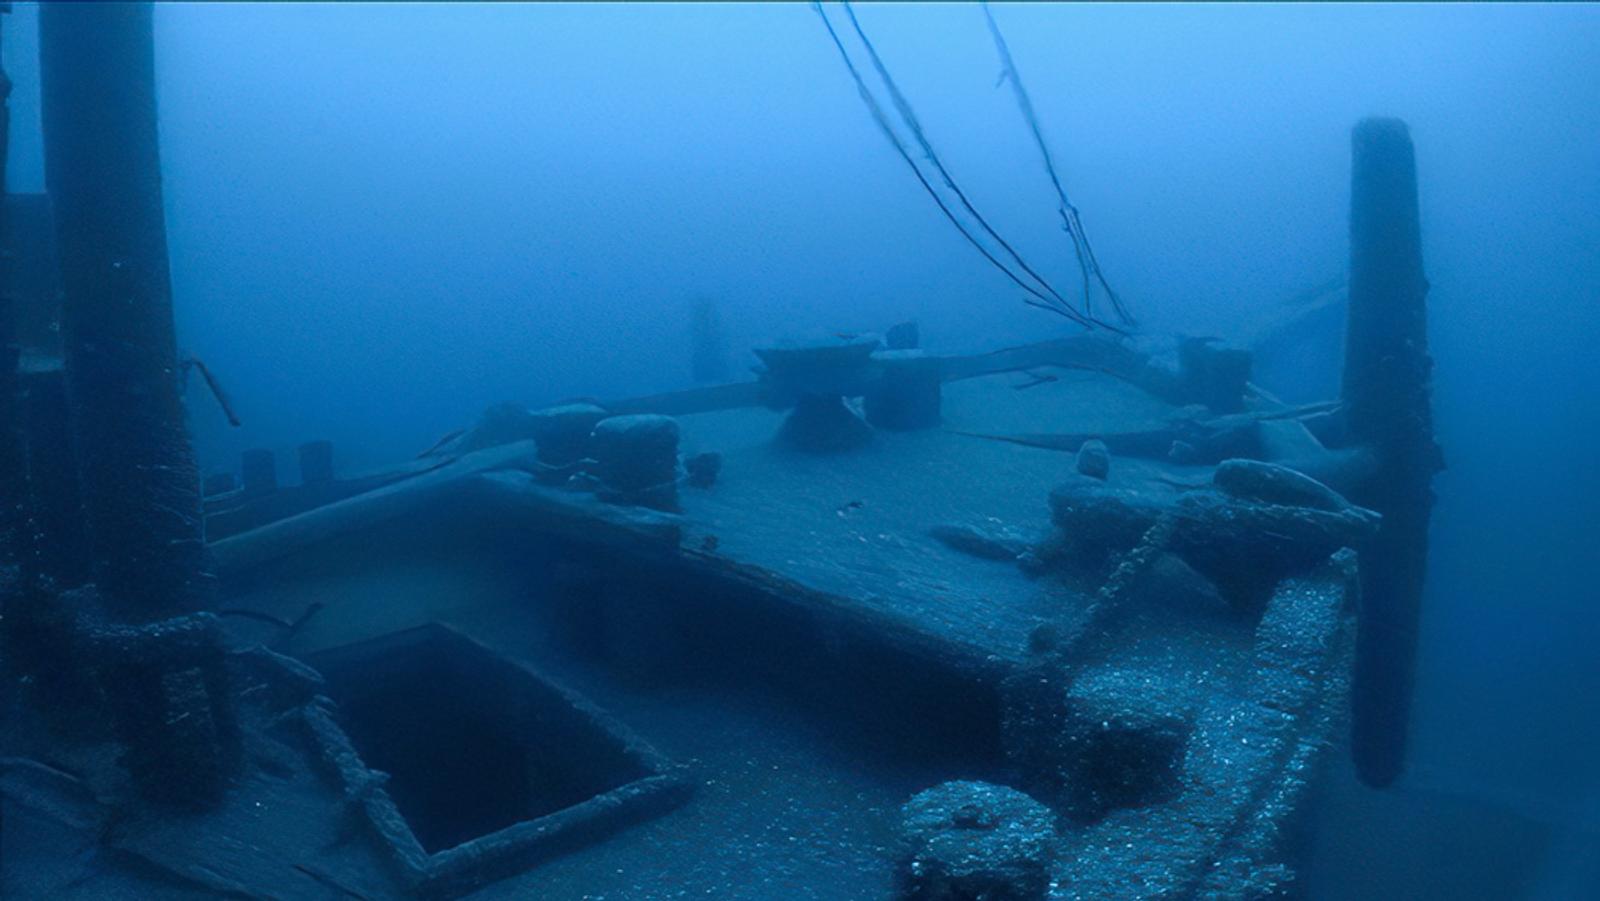 An underwater image of the Ironton, located in 2019 in Lake Huron's shipwreck alley.